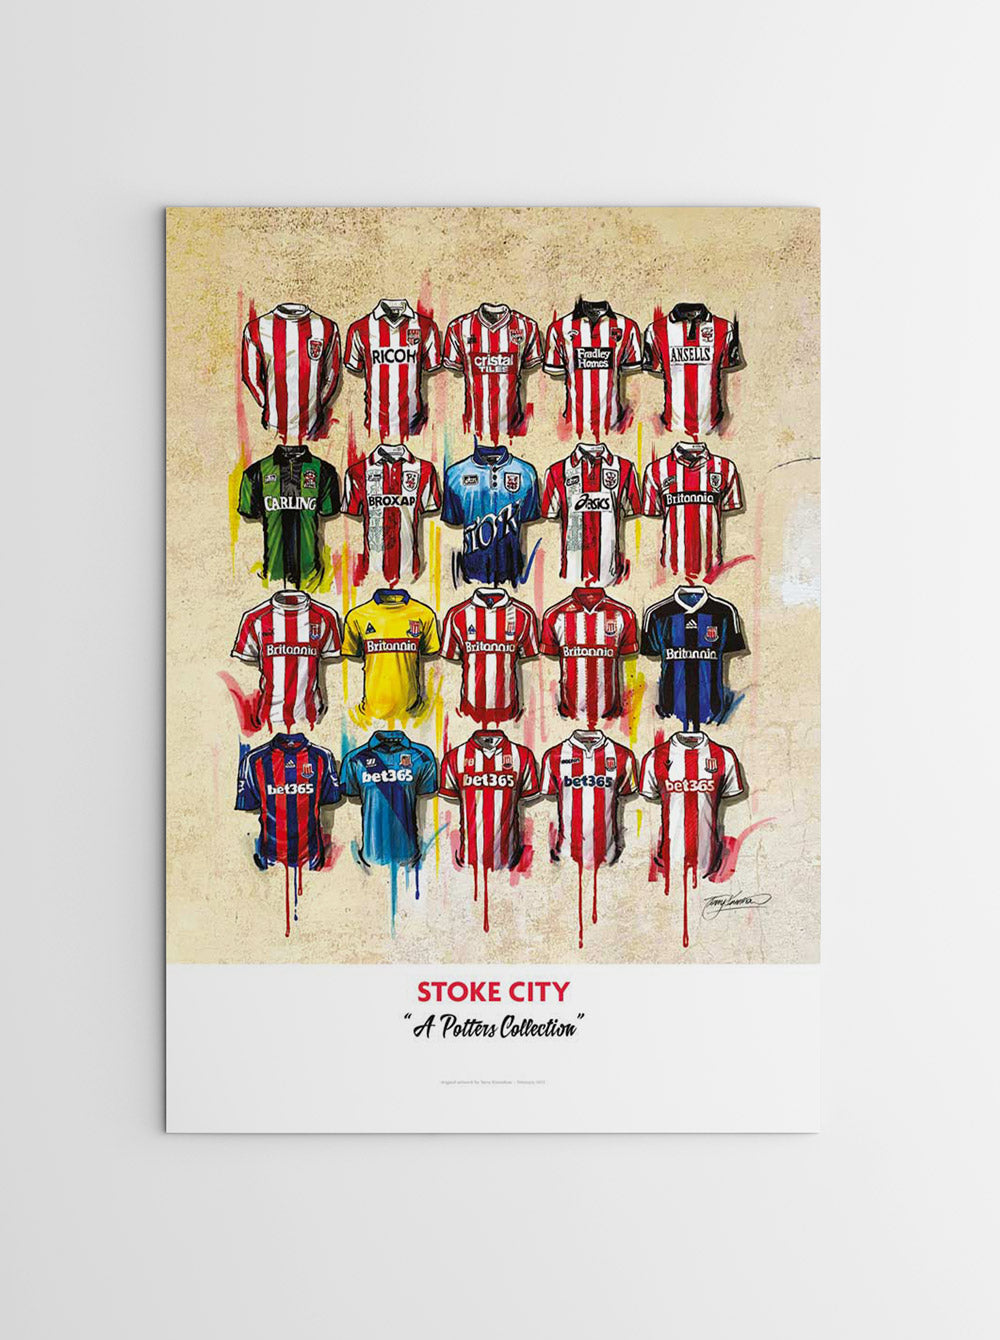 The Stoke team shirts personalised A2 limited edition print artwork by Terry Kneeshaw features 20 iconic jerseys of the club. The artwork showcases the classic Stoke team shirts over the years, including home and away shirts. Fans can enjoy a trip down memory lane as they admire the evolution of the club's kit designs. The print is of high quality, making it the perfect addition to any Stoke City supporter's collection.